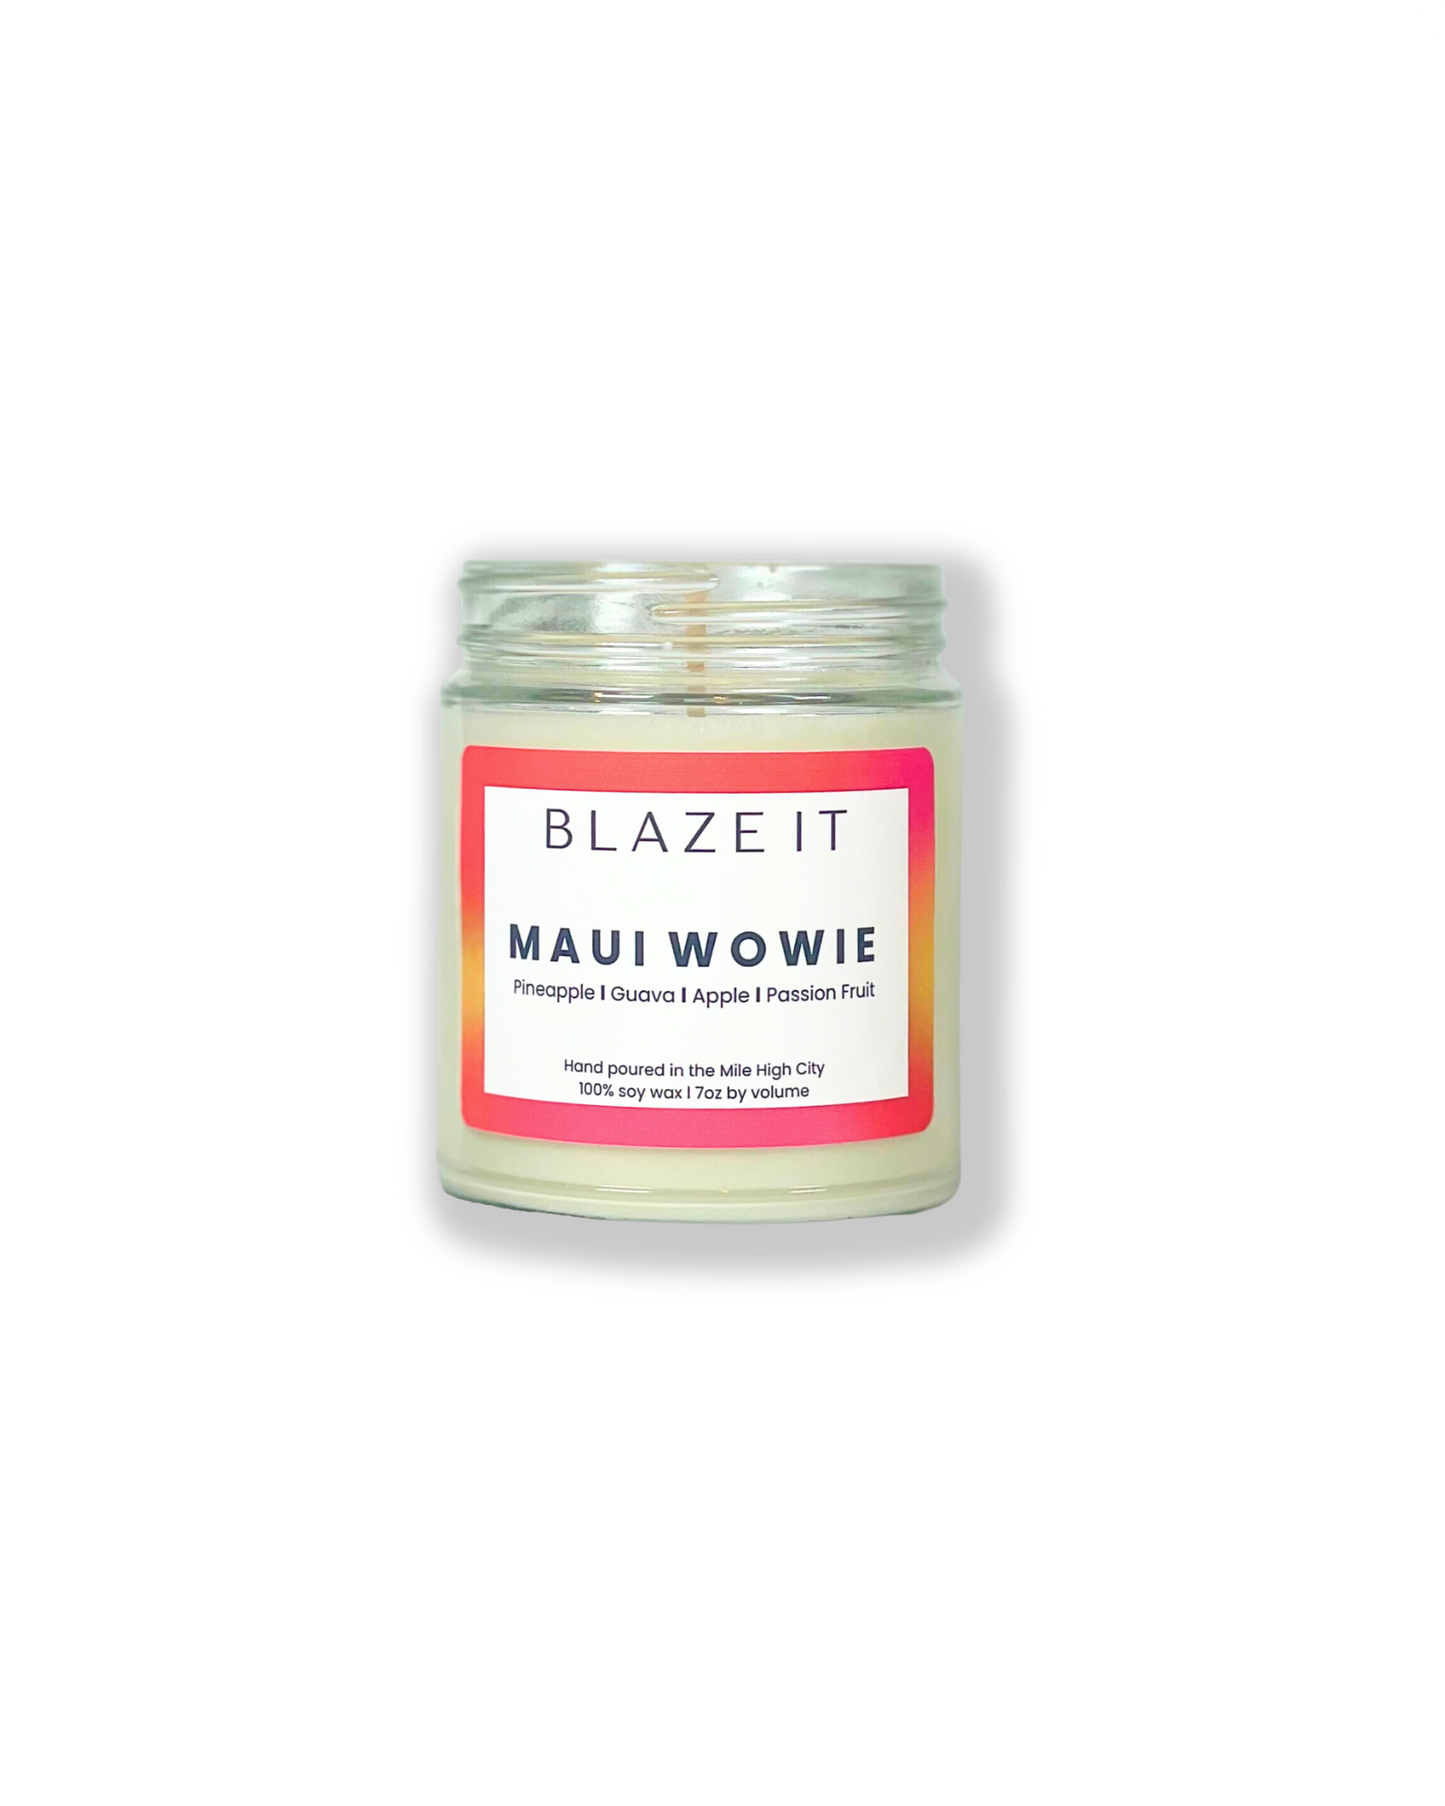 Maui Wowie candle with notes of PIneapple, Guava, Apple and Passion Fruit l Blaze It Candle Co